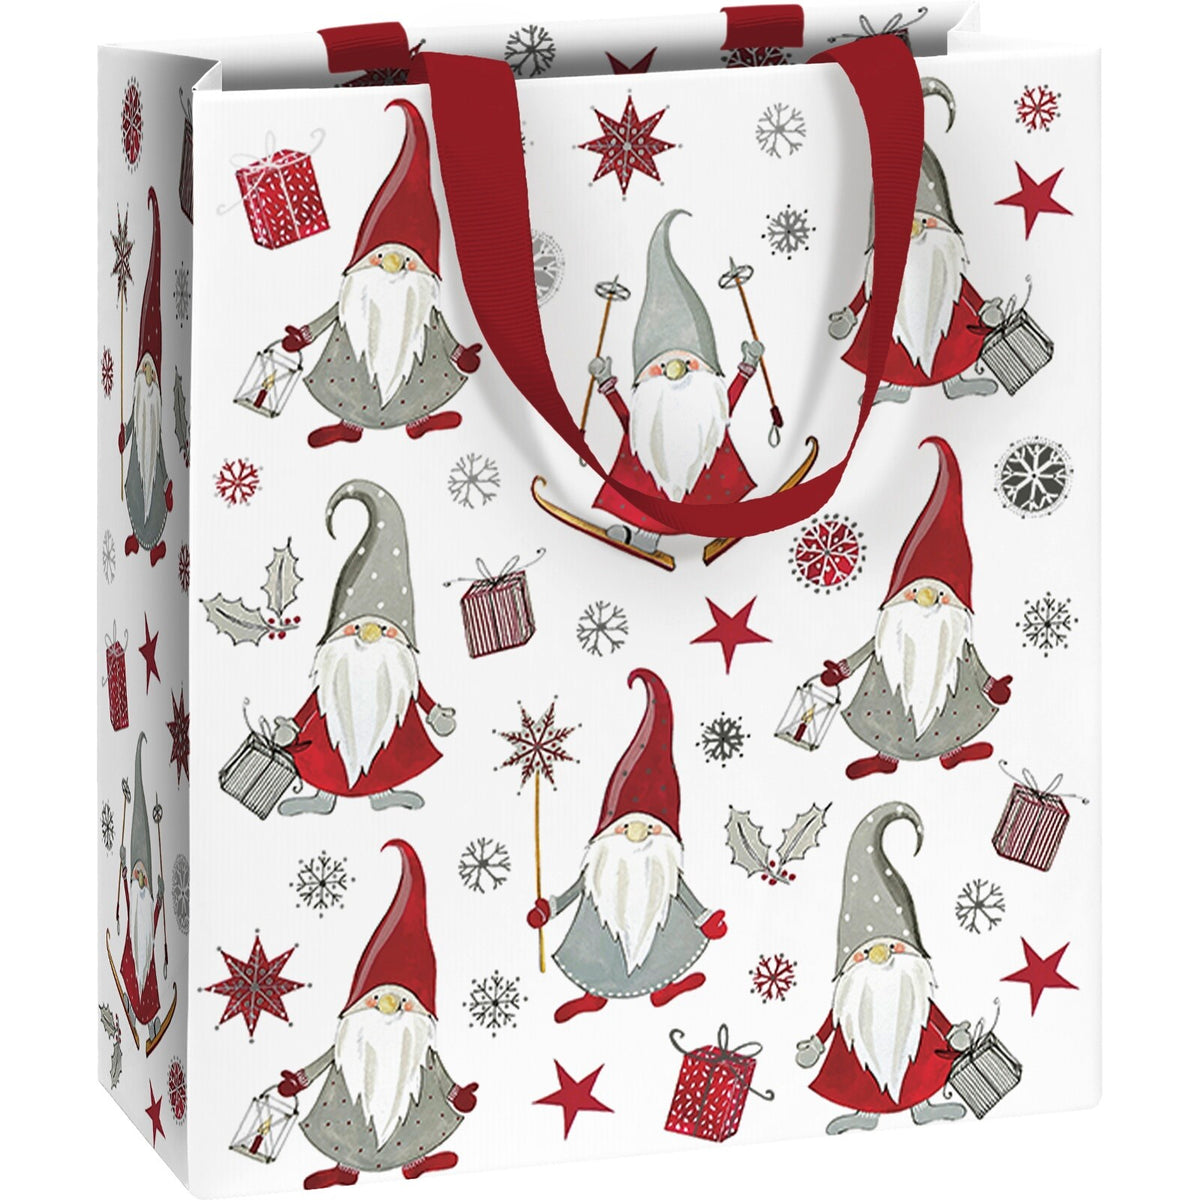 Nisse Small Christmas Gift Bag by penny black